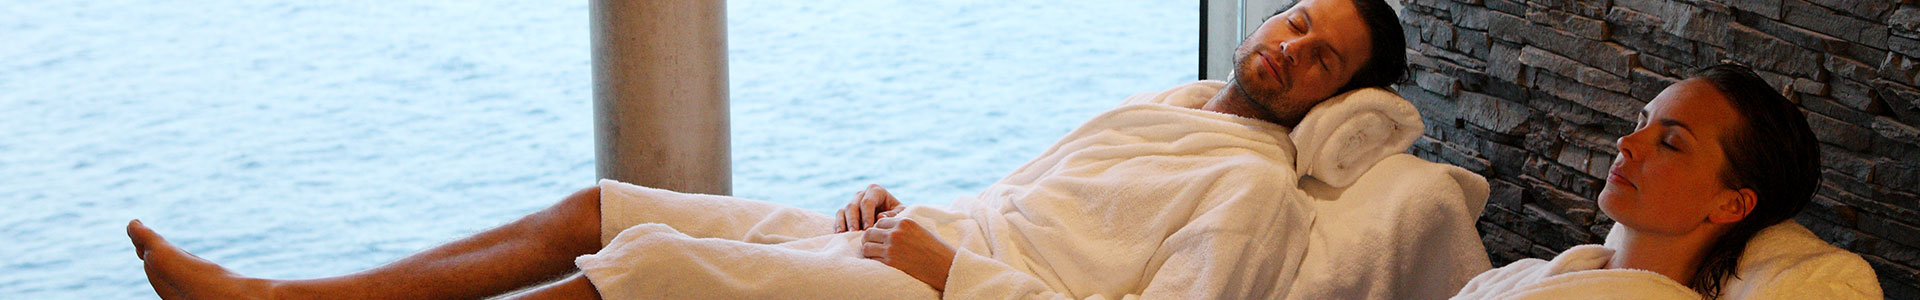 On board wellness & spa center | MSC Yacht Club Massage Rooms | Balinese Spa | Thalassotherapy